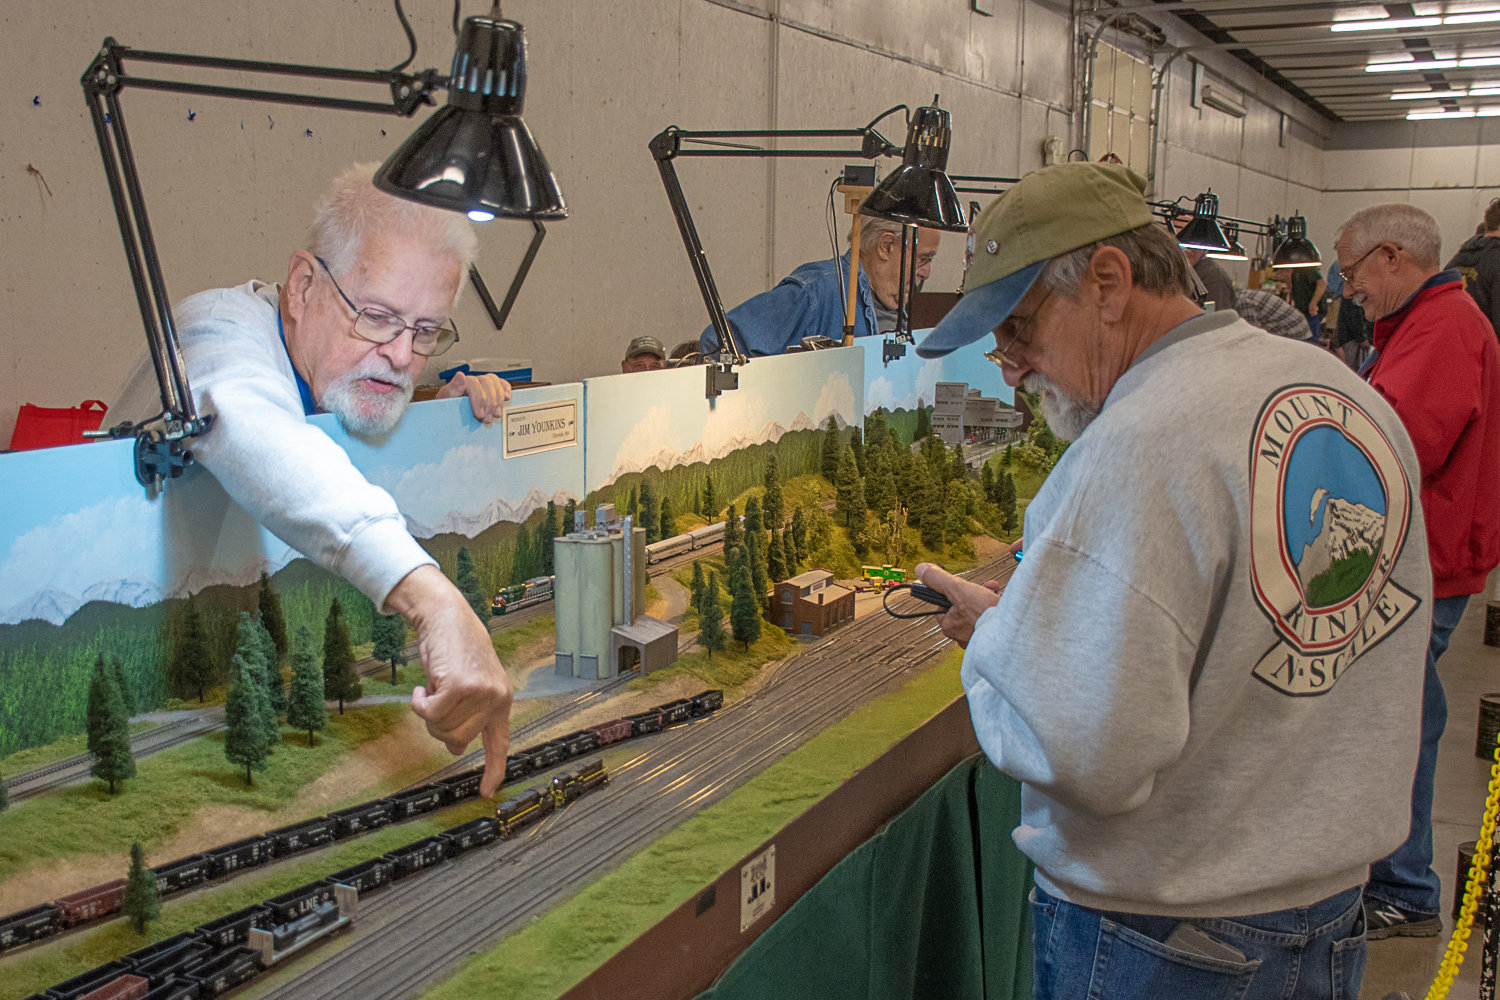 Dennis Reeve, right, and Greg Okrasinski, left, troubleshoot an electrical track issue on the Mount Rainier display they both helped create. Okrasinski claimed that in this display there was over a mile's worth of model train tracks laid out. The Lewis County Model Railroad Club hosted a swap meet and show Saturday and Sunday in the Blue Pavilion at the Southwest Washington Fairgrounds.